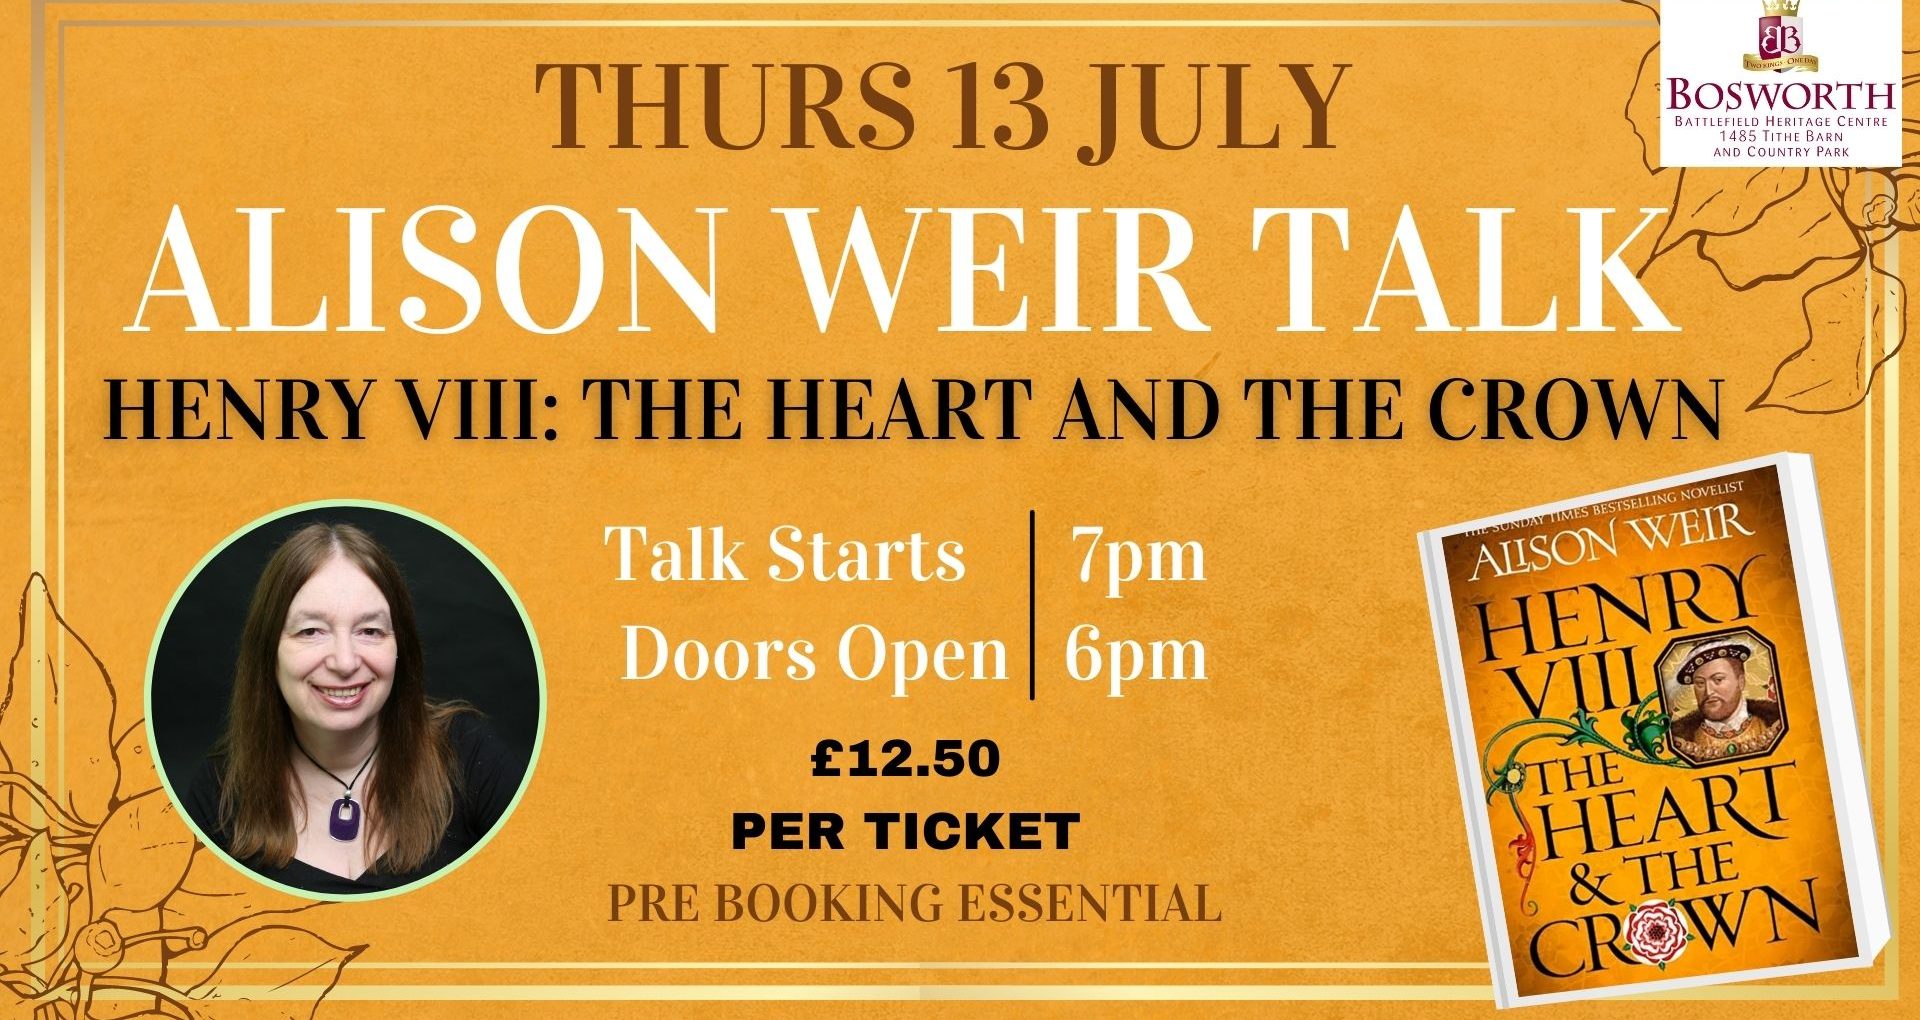 Alison Weir Talk: Henry VIII: The Heart and the Crown